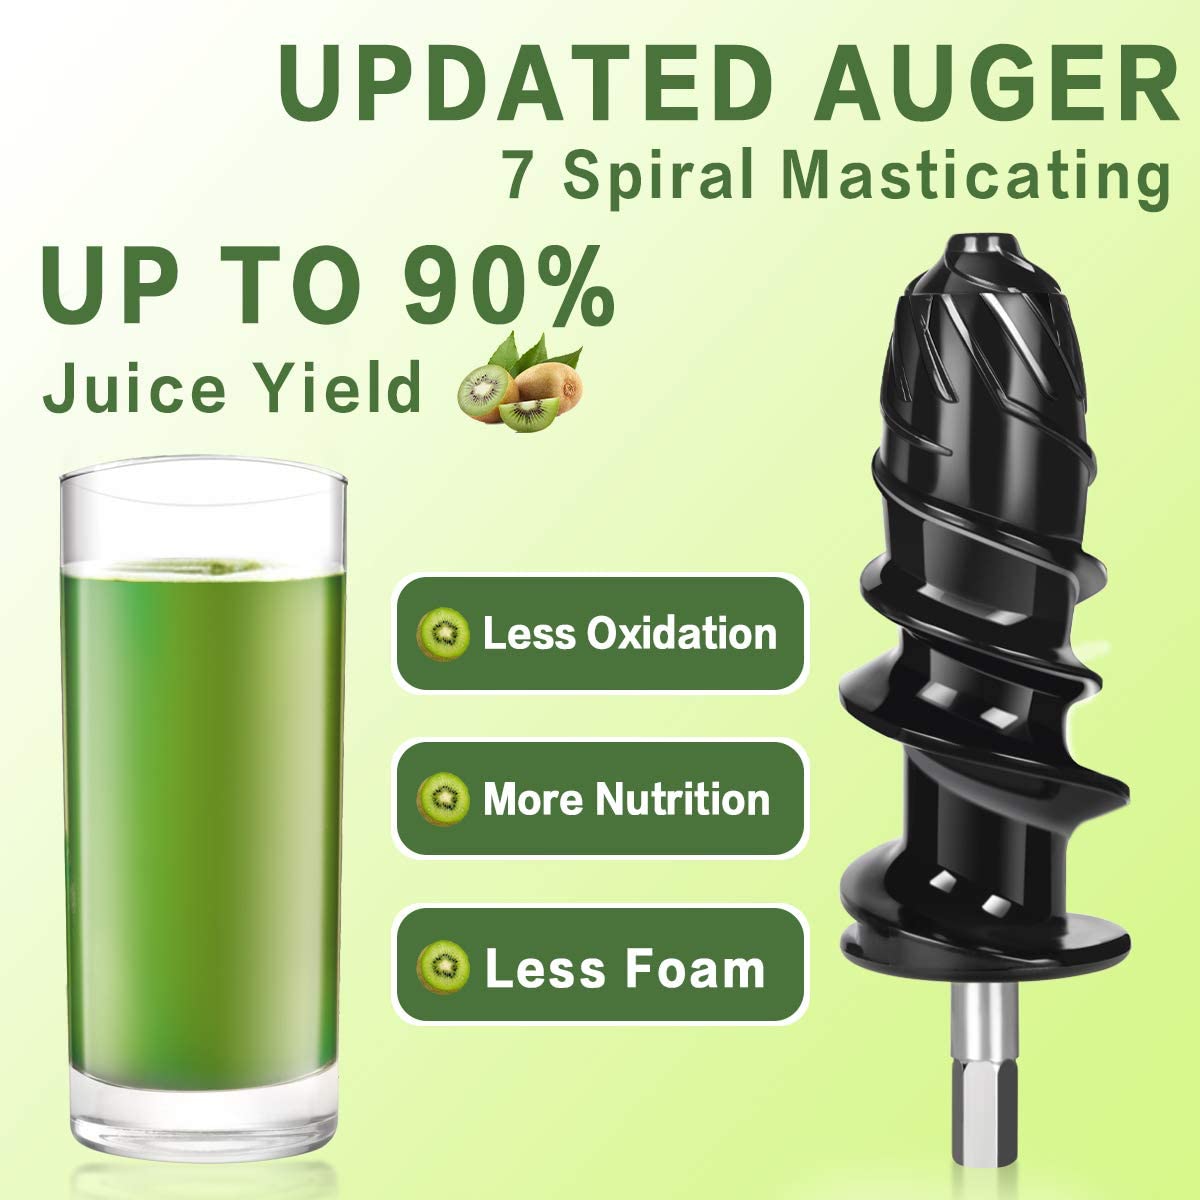 CIRAGO Juicer Machines, Slow Masticating Juicer Extractor Two Speed Adjustment, Easy to Clean, Quiet Motor, Cold Press Juicer for Vegetables and Fruits, BPA-Free (Green)